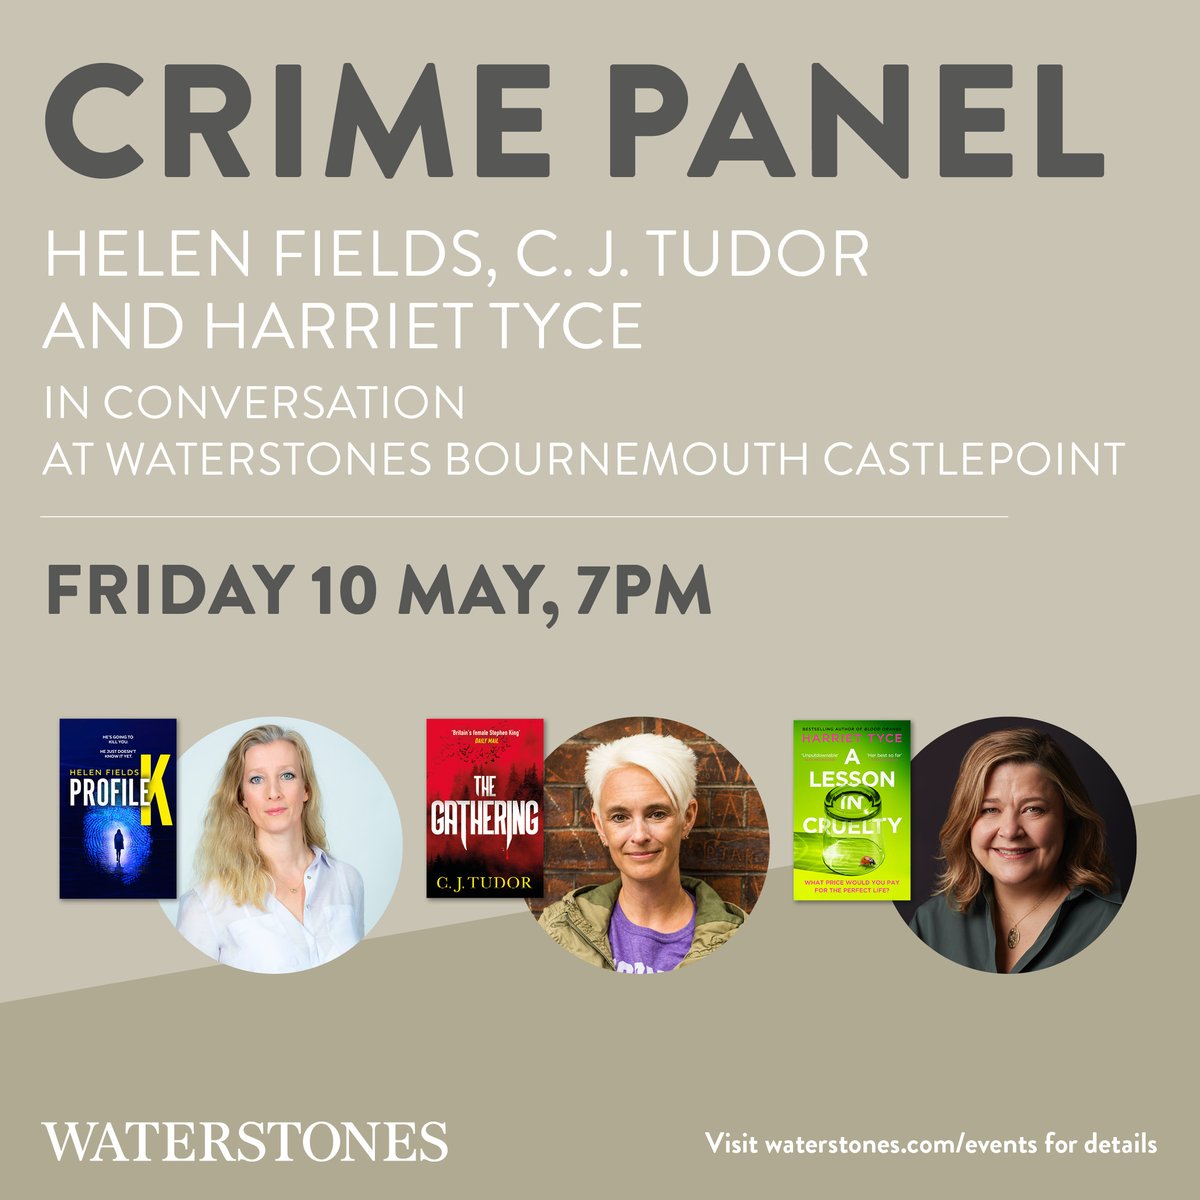 Thrilled to share that the brilliant @helen_fields will be joining @cjtudor and @harriet_tyce @Waterstonesbmth for an exclusive Crime Panel on May 10th! Don't miss out on gripping tales and behind-the-scenes insights ow.ly/w9QK50RnOni